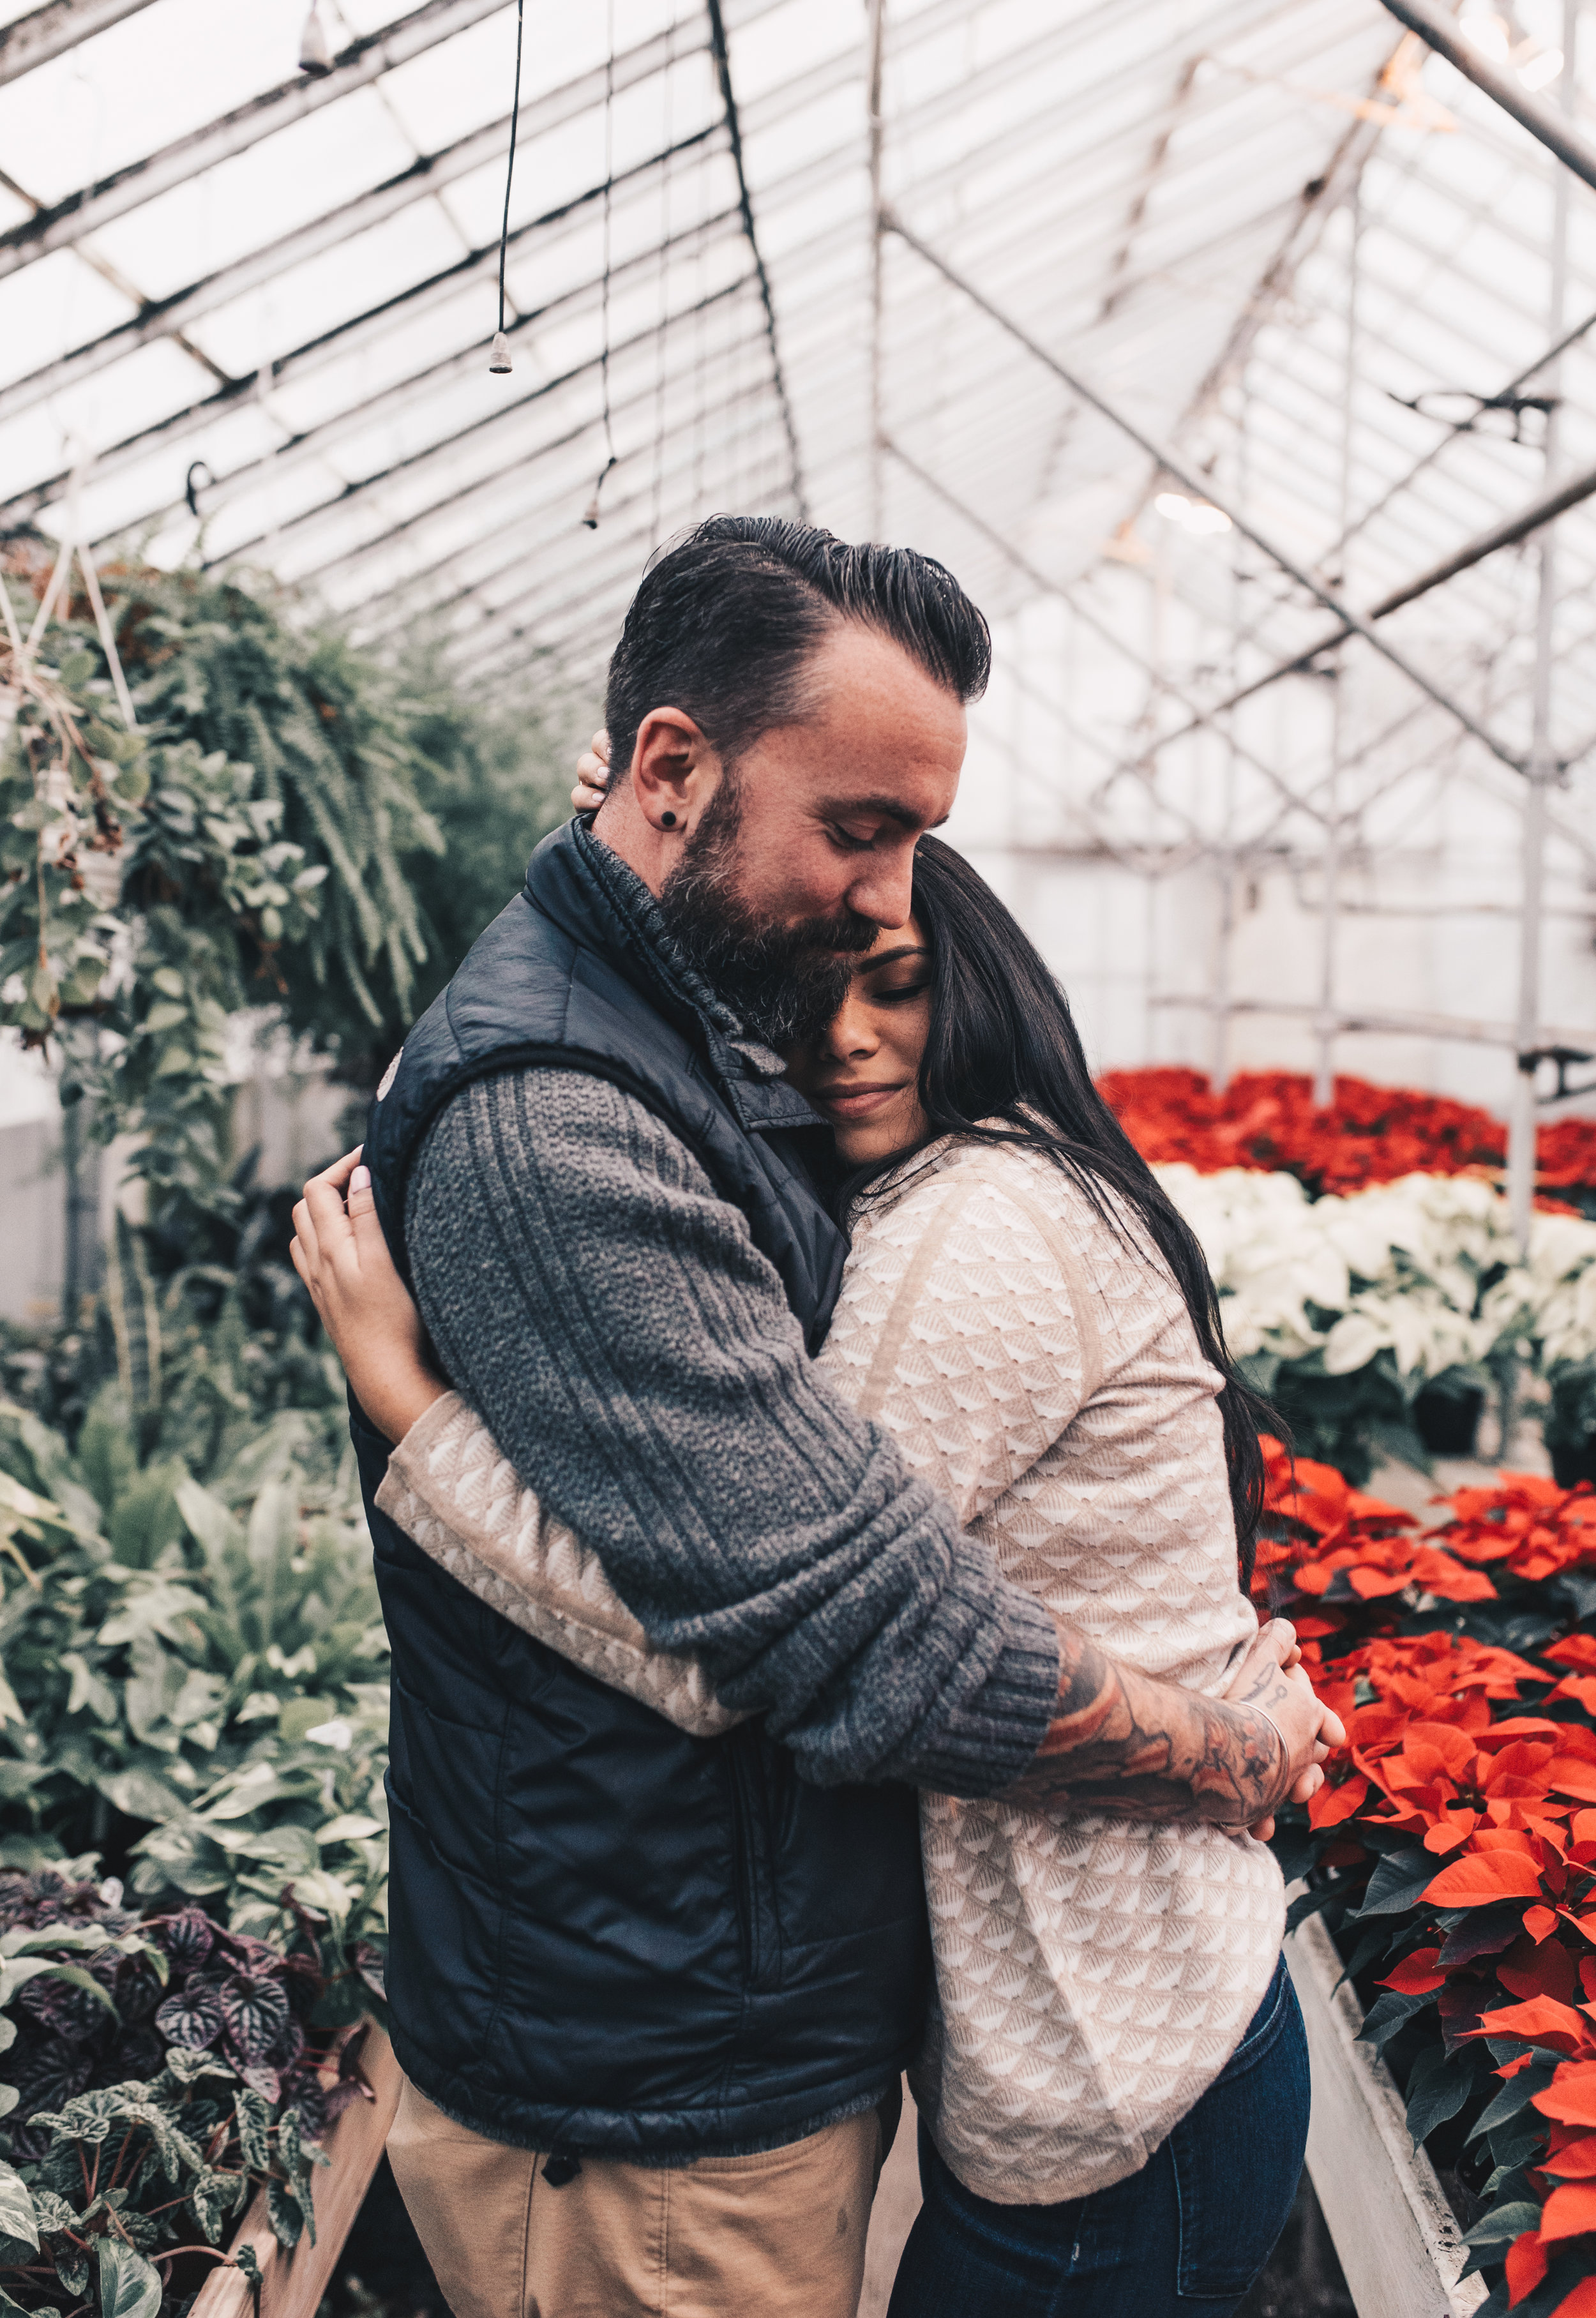 Greenhouse Couples Photography, Greenhouse Engagement Photography, Illinois Couples Photographer